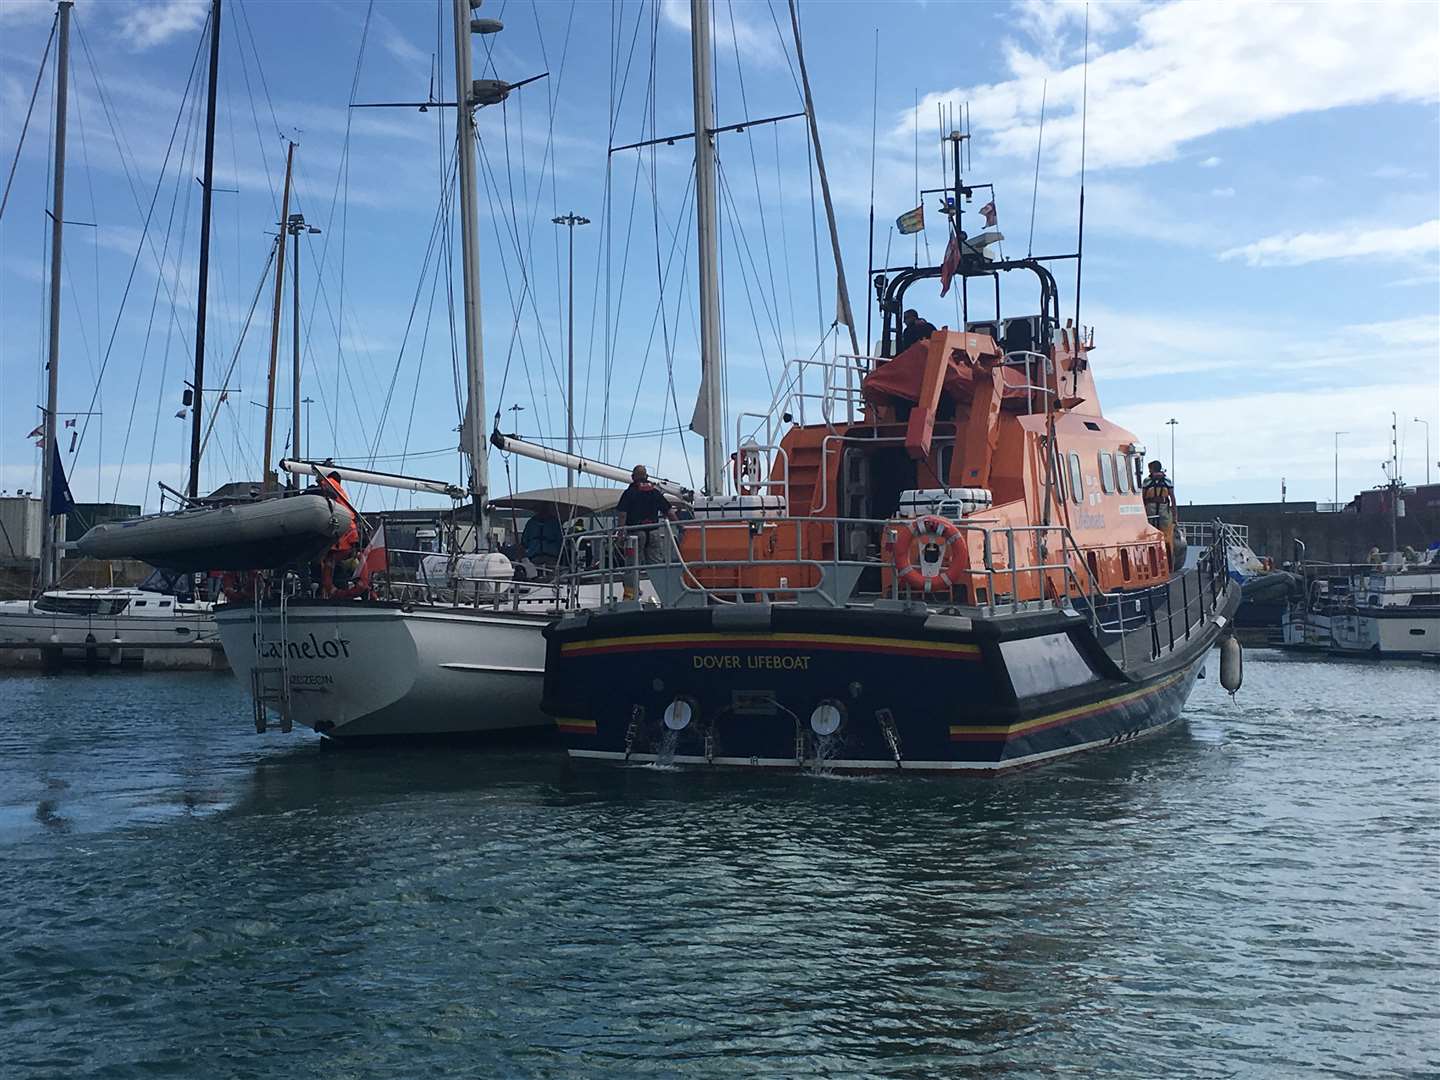 Dover Lifeboat brings Camelot back in